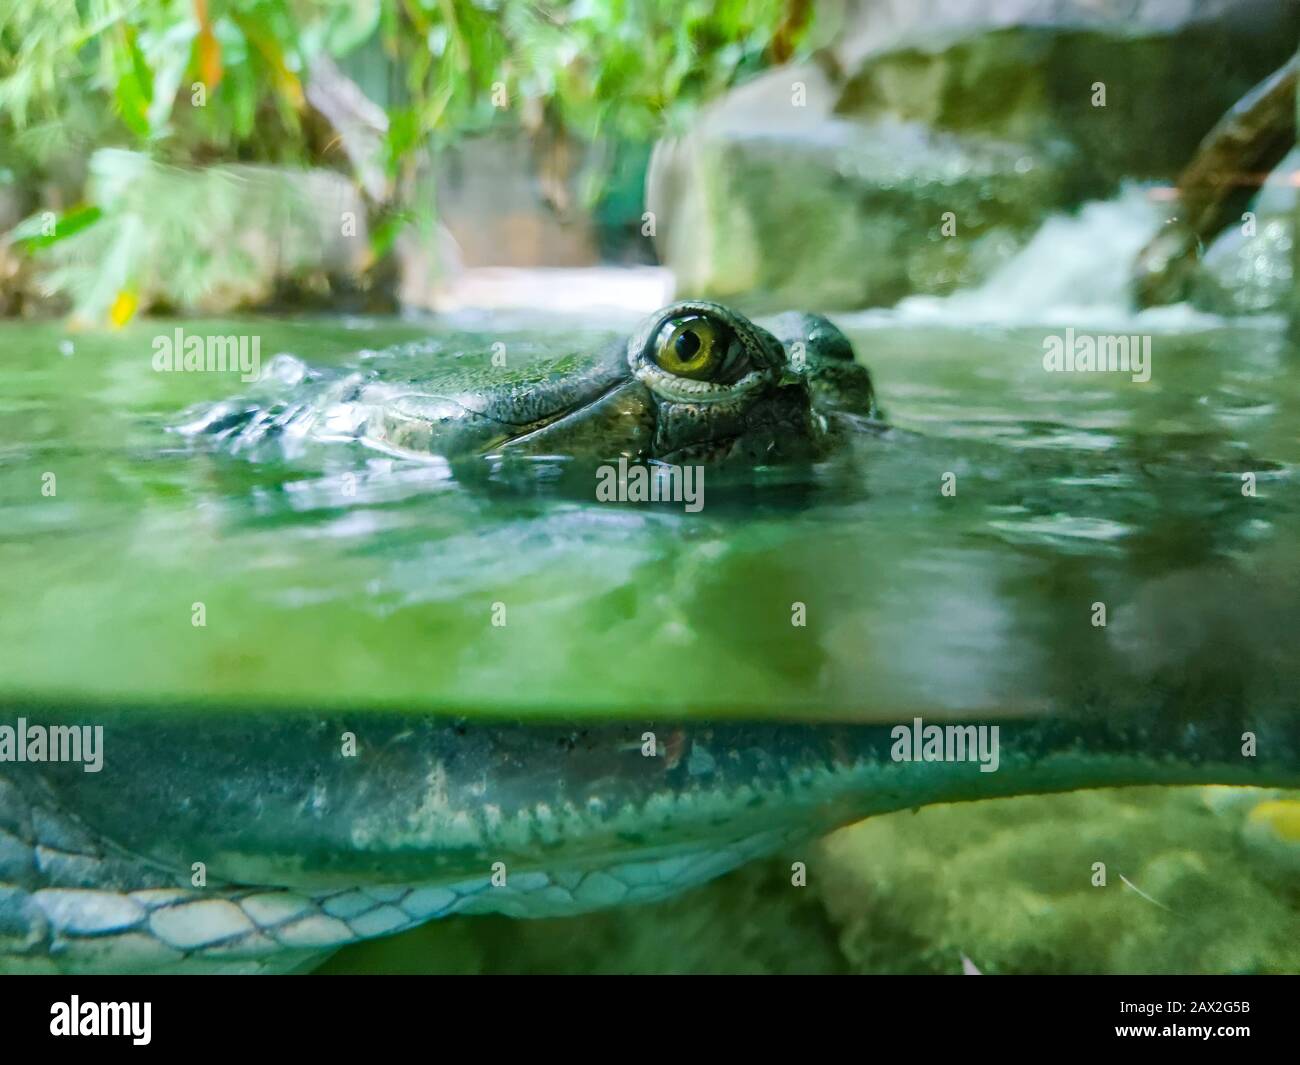 Underwater photo of green crocodile with green eyes. It is close up wildlife photo. His head is above water and his body is under water. Stock Photo